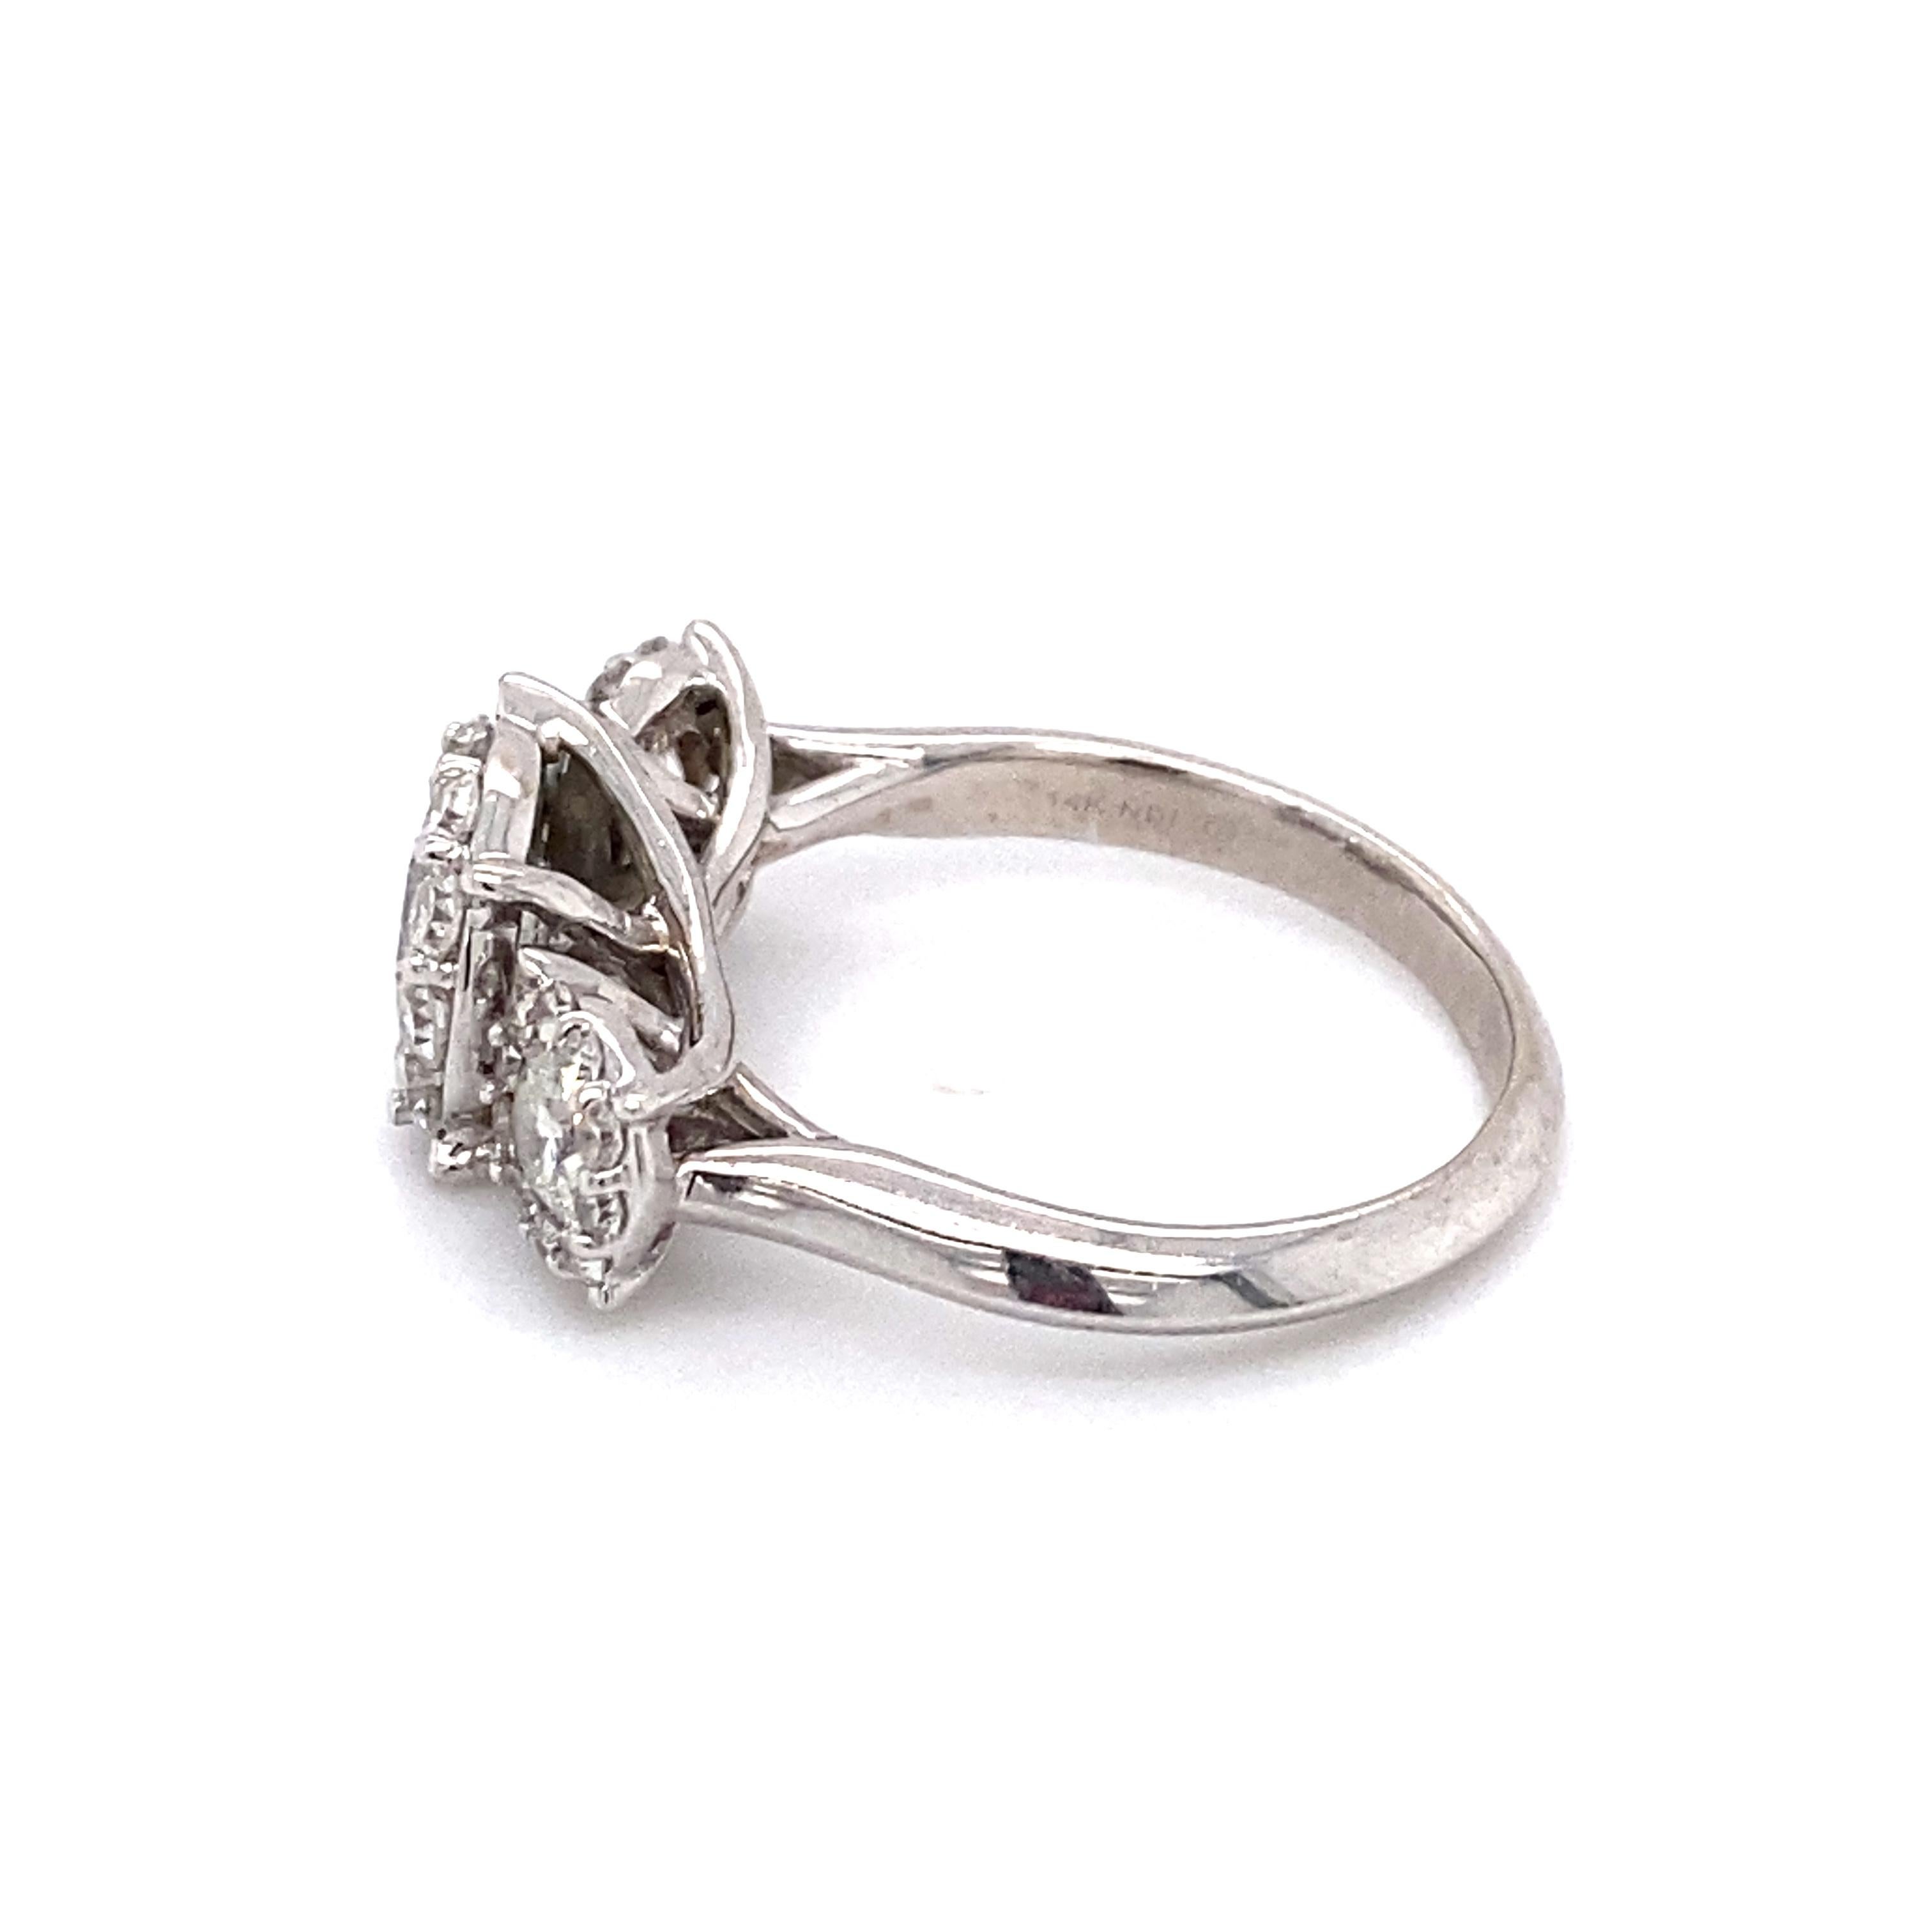 Circa: 1990s
Metal Type: 14 Karat White Gold
Weight: 4.8 grams
Size: US 6.5, resizable

Diamond Details:

Carat: 2.50 carat total weight
Shape: Round brilliant
Color: I-J
Clarity: SI1